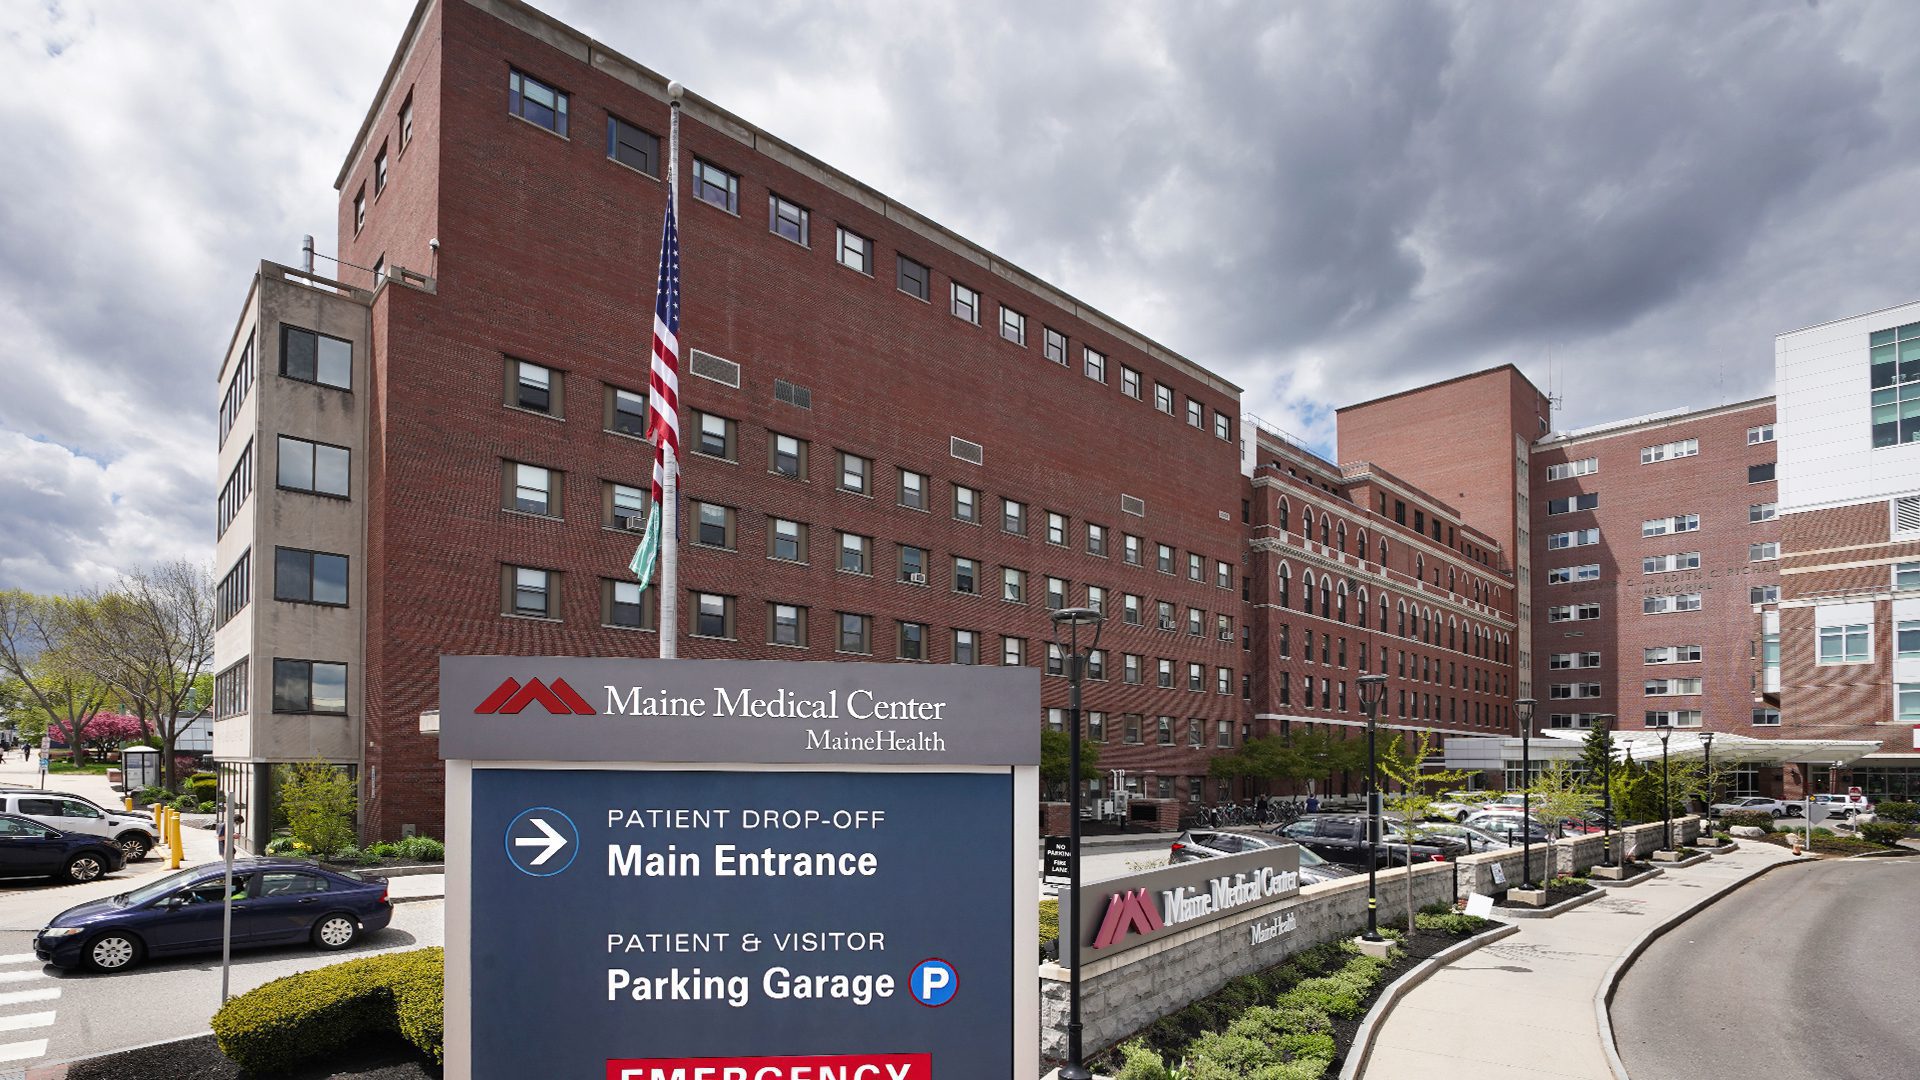 The exterior entrance sign to the Maine Medical Center in Portland.